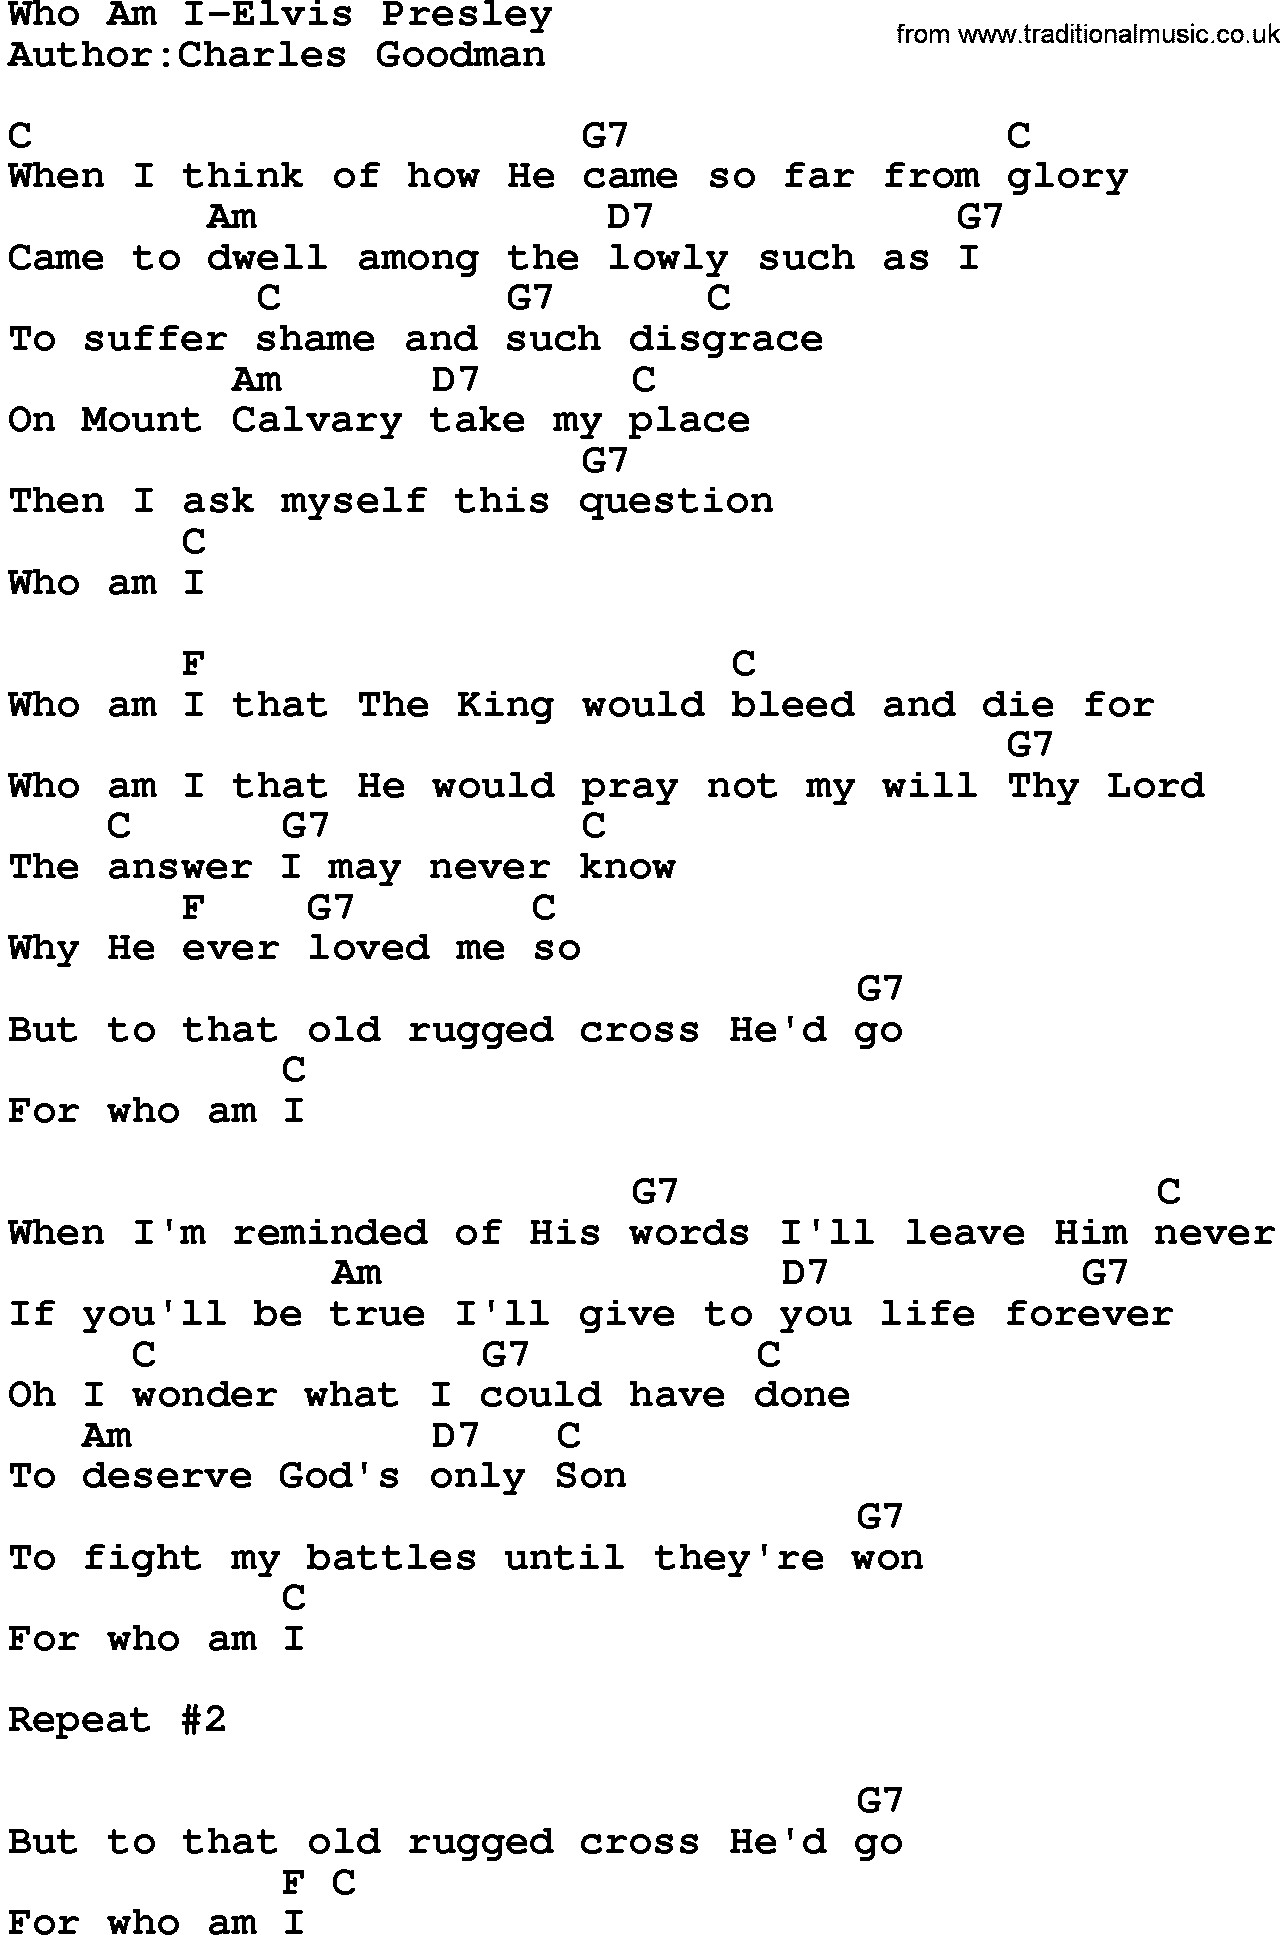 Country music song: Who Am I-Elvis Presley lyrics and chords